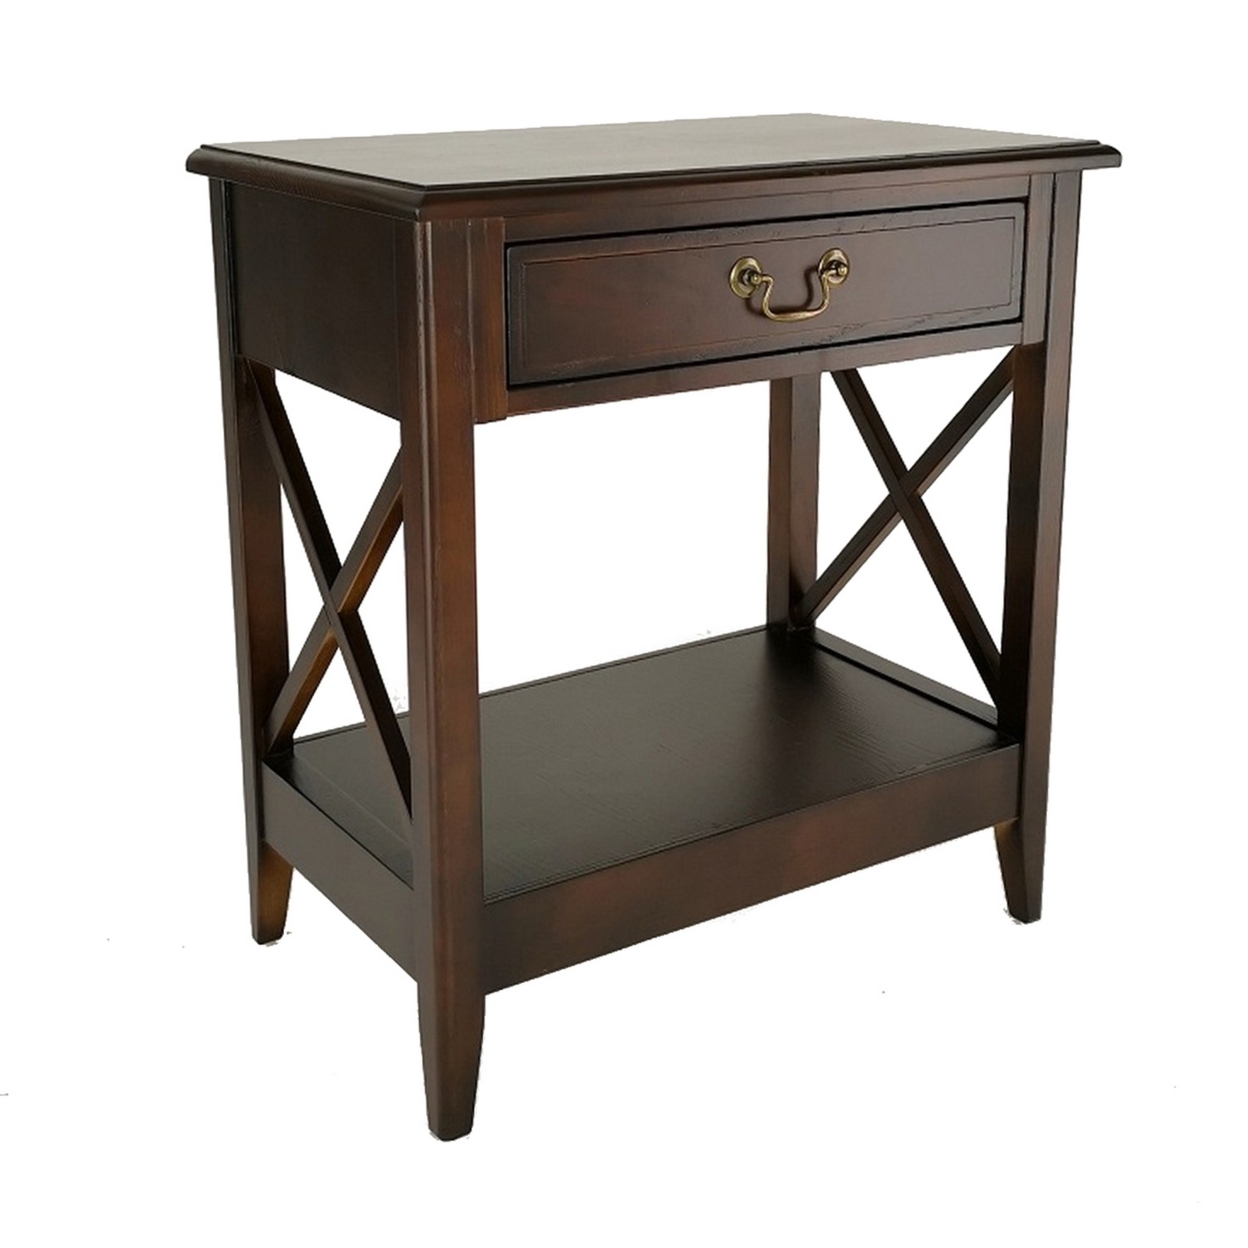 Nightstand With 1 Drawer And Criss Cross Sides, Espresso Brown- Saltoro Sherpi